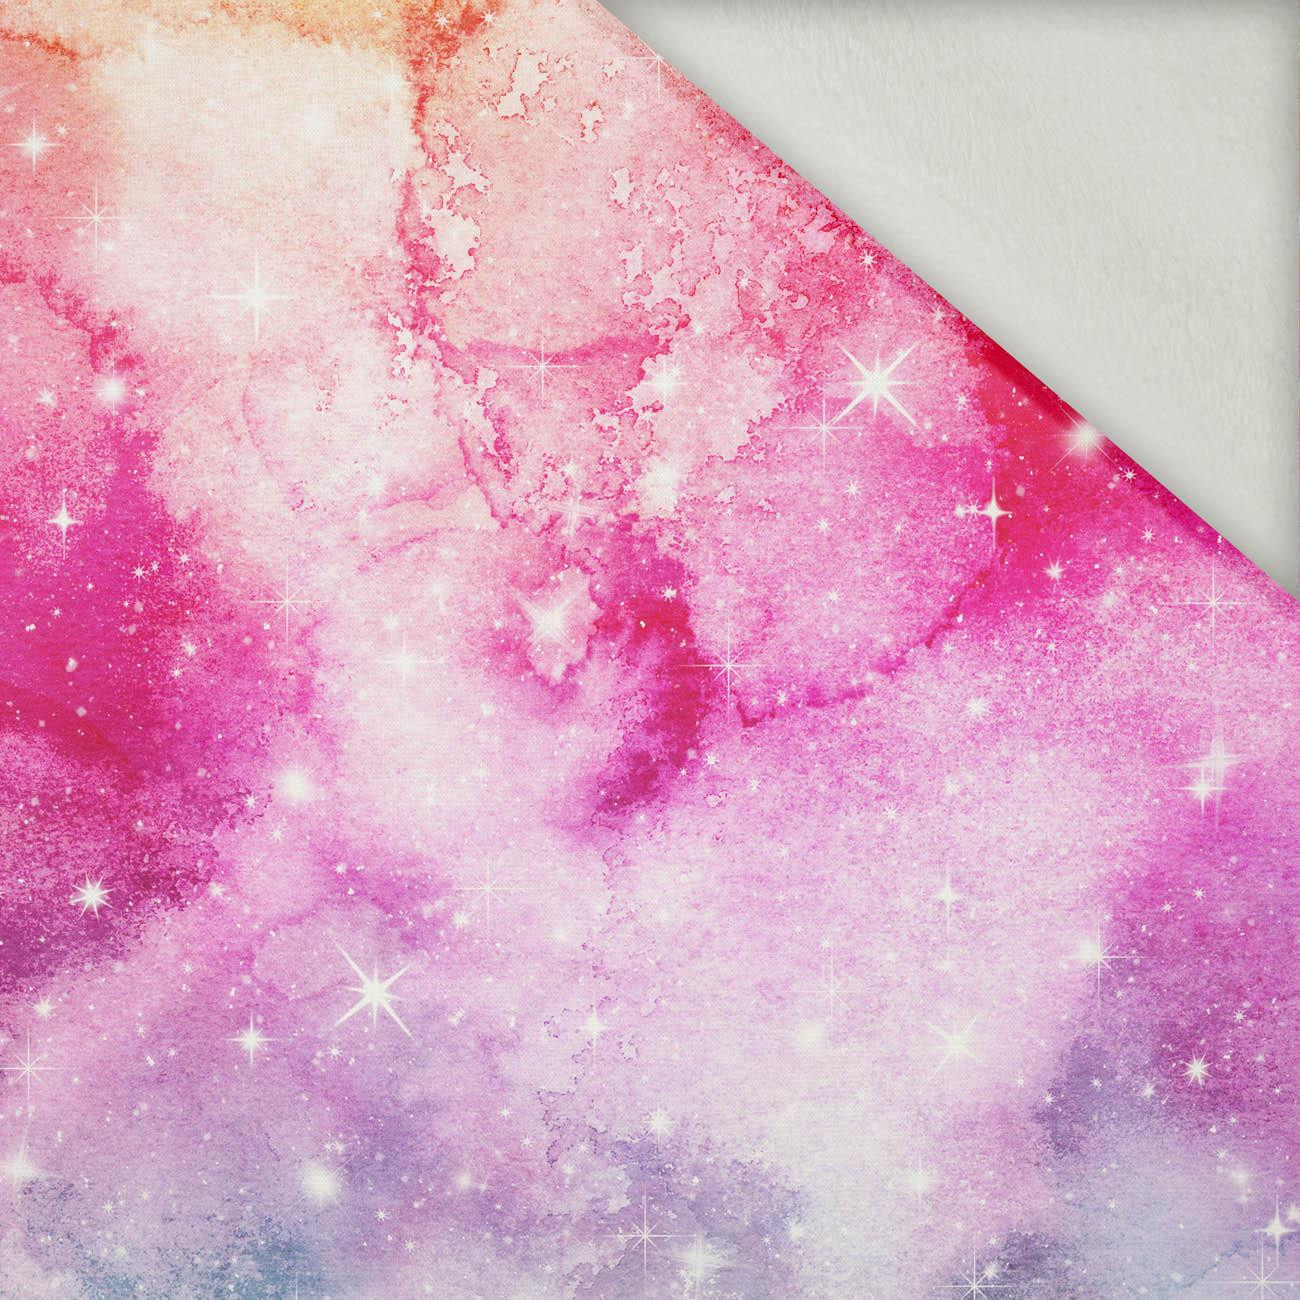 WATERCOLOR GALAXY PAT. 1 - brushed knit fabric with teddy / alpine fleece